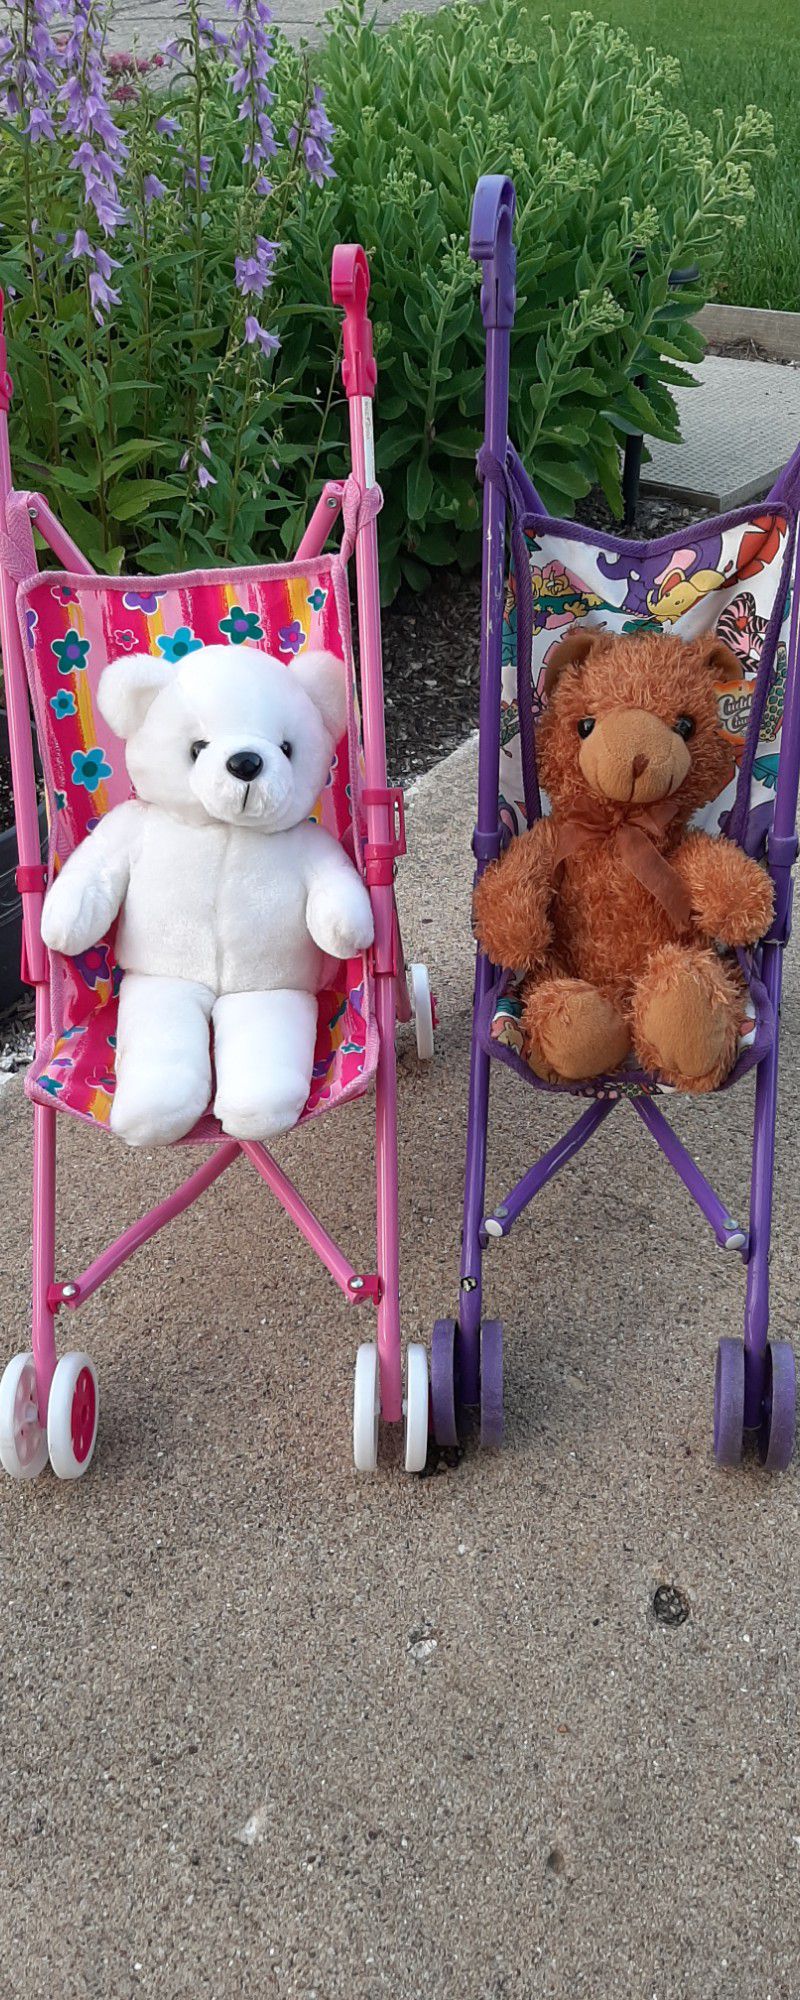 Play Strollers with Stuffed Animals